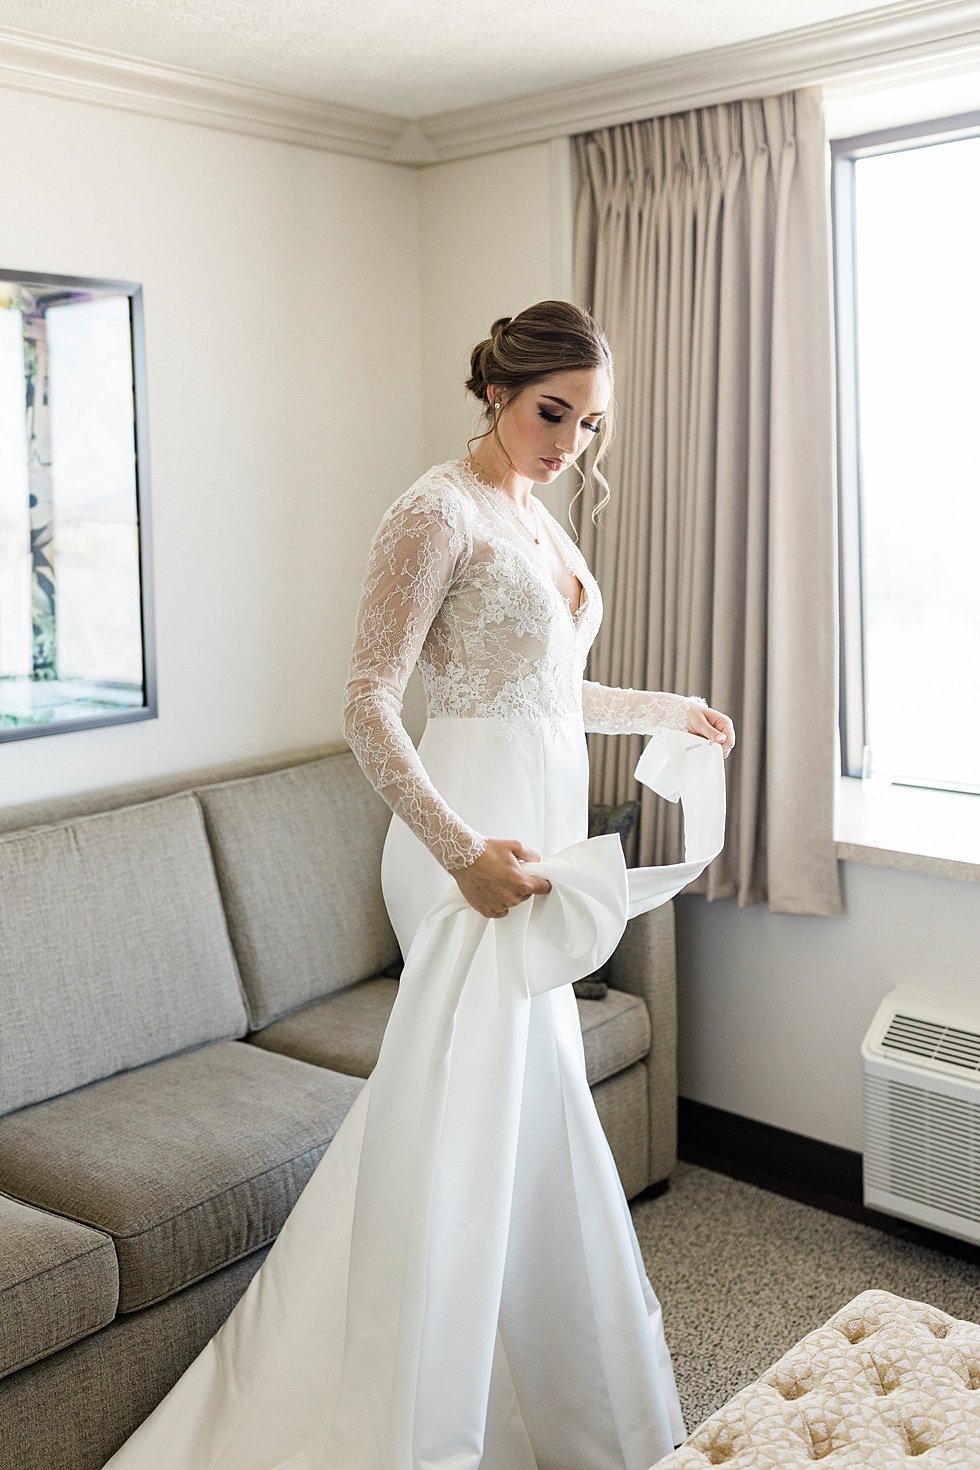  Bride getting ready with bridesmaids on wedding day at Galt House Hotel. Lauren and Adam's winter wedding at St Agnes Catholic church and the Frazier History Museum. 